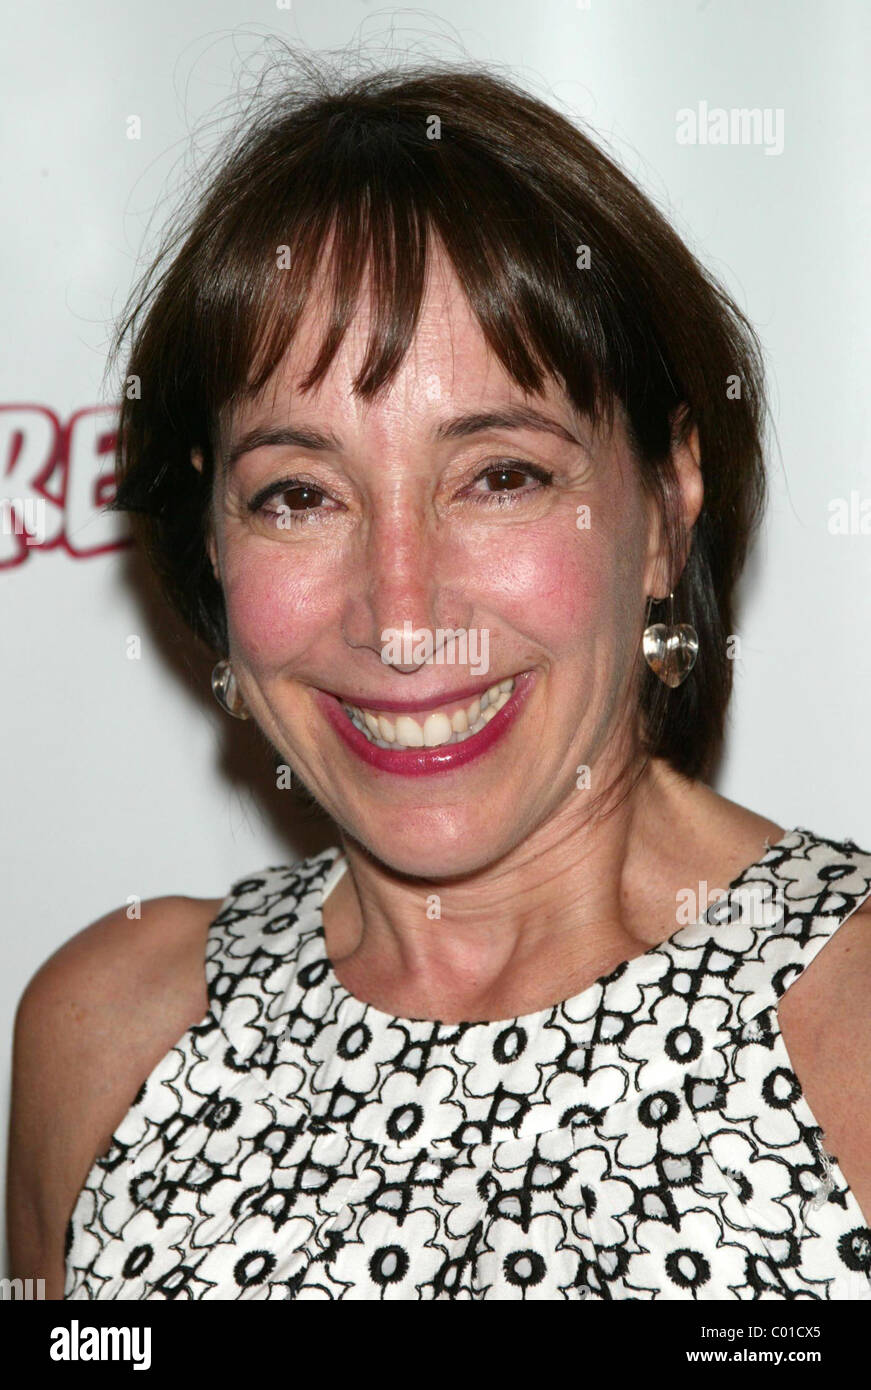 Didi Conn Opening Night of the Broadway musical 'Grease' at the Brooks Atkinson Theatre - Arrivals New York City, USA -19.08.07 Stock Photo